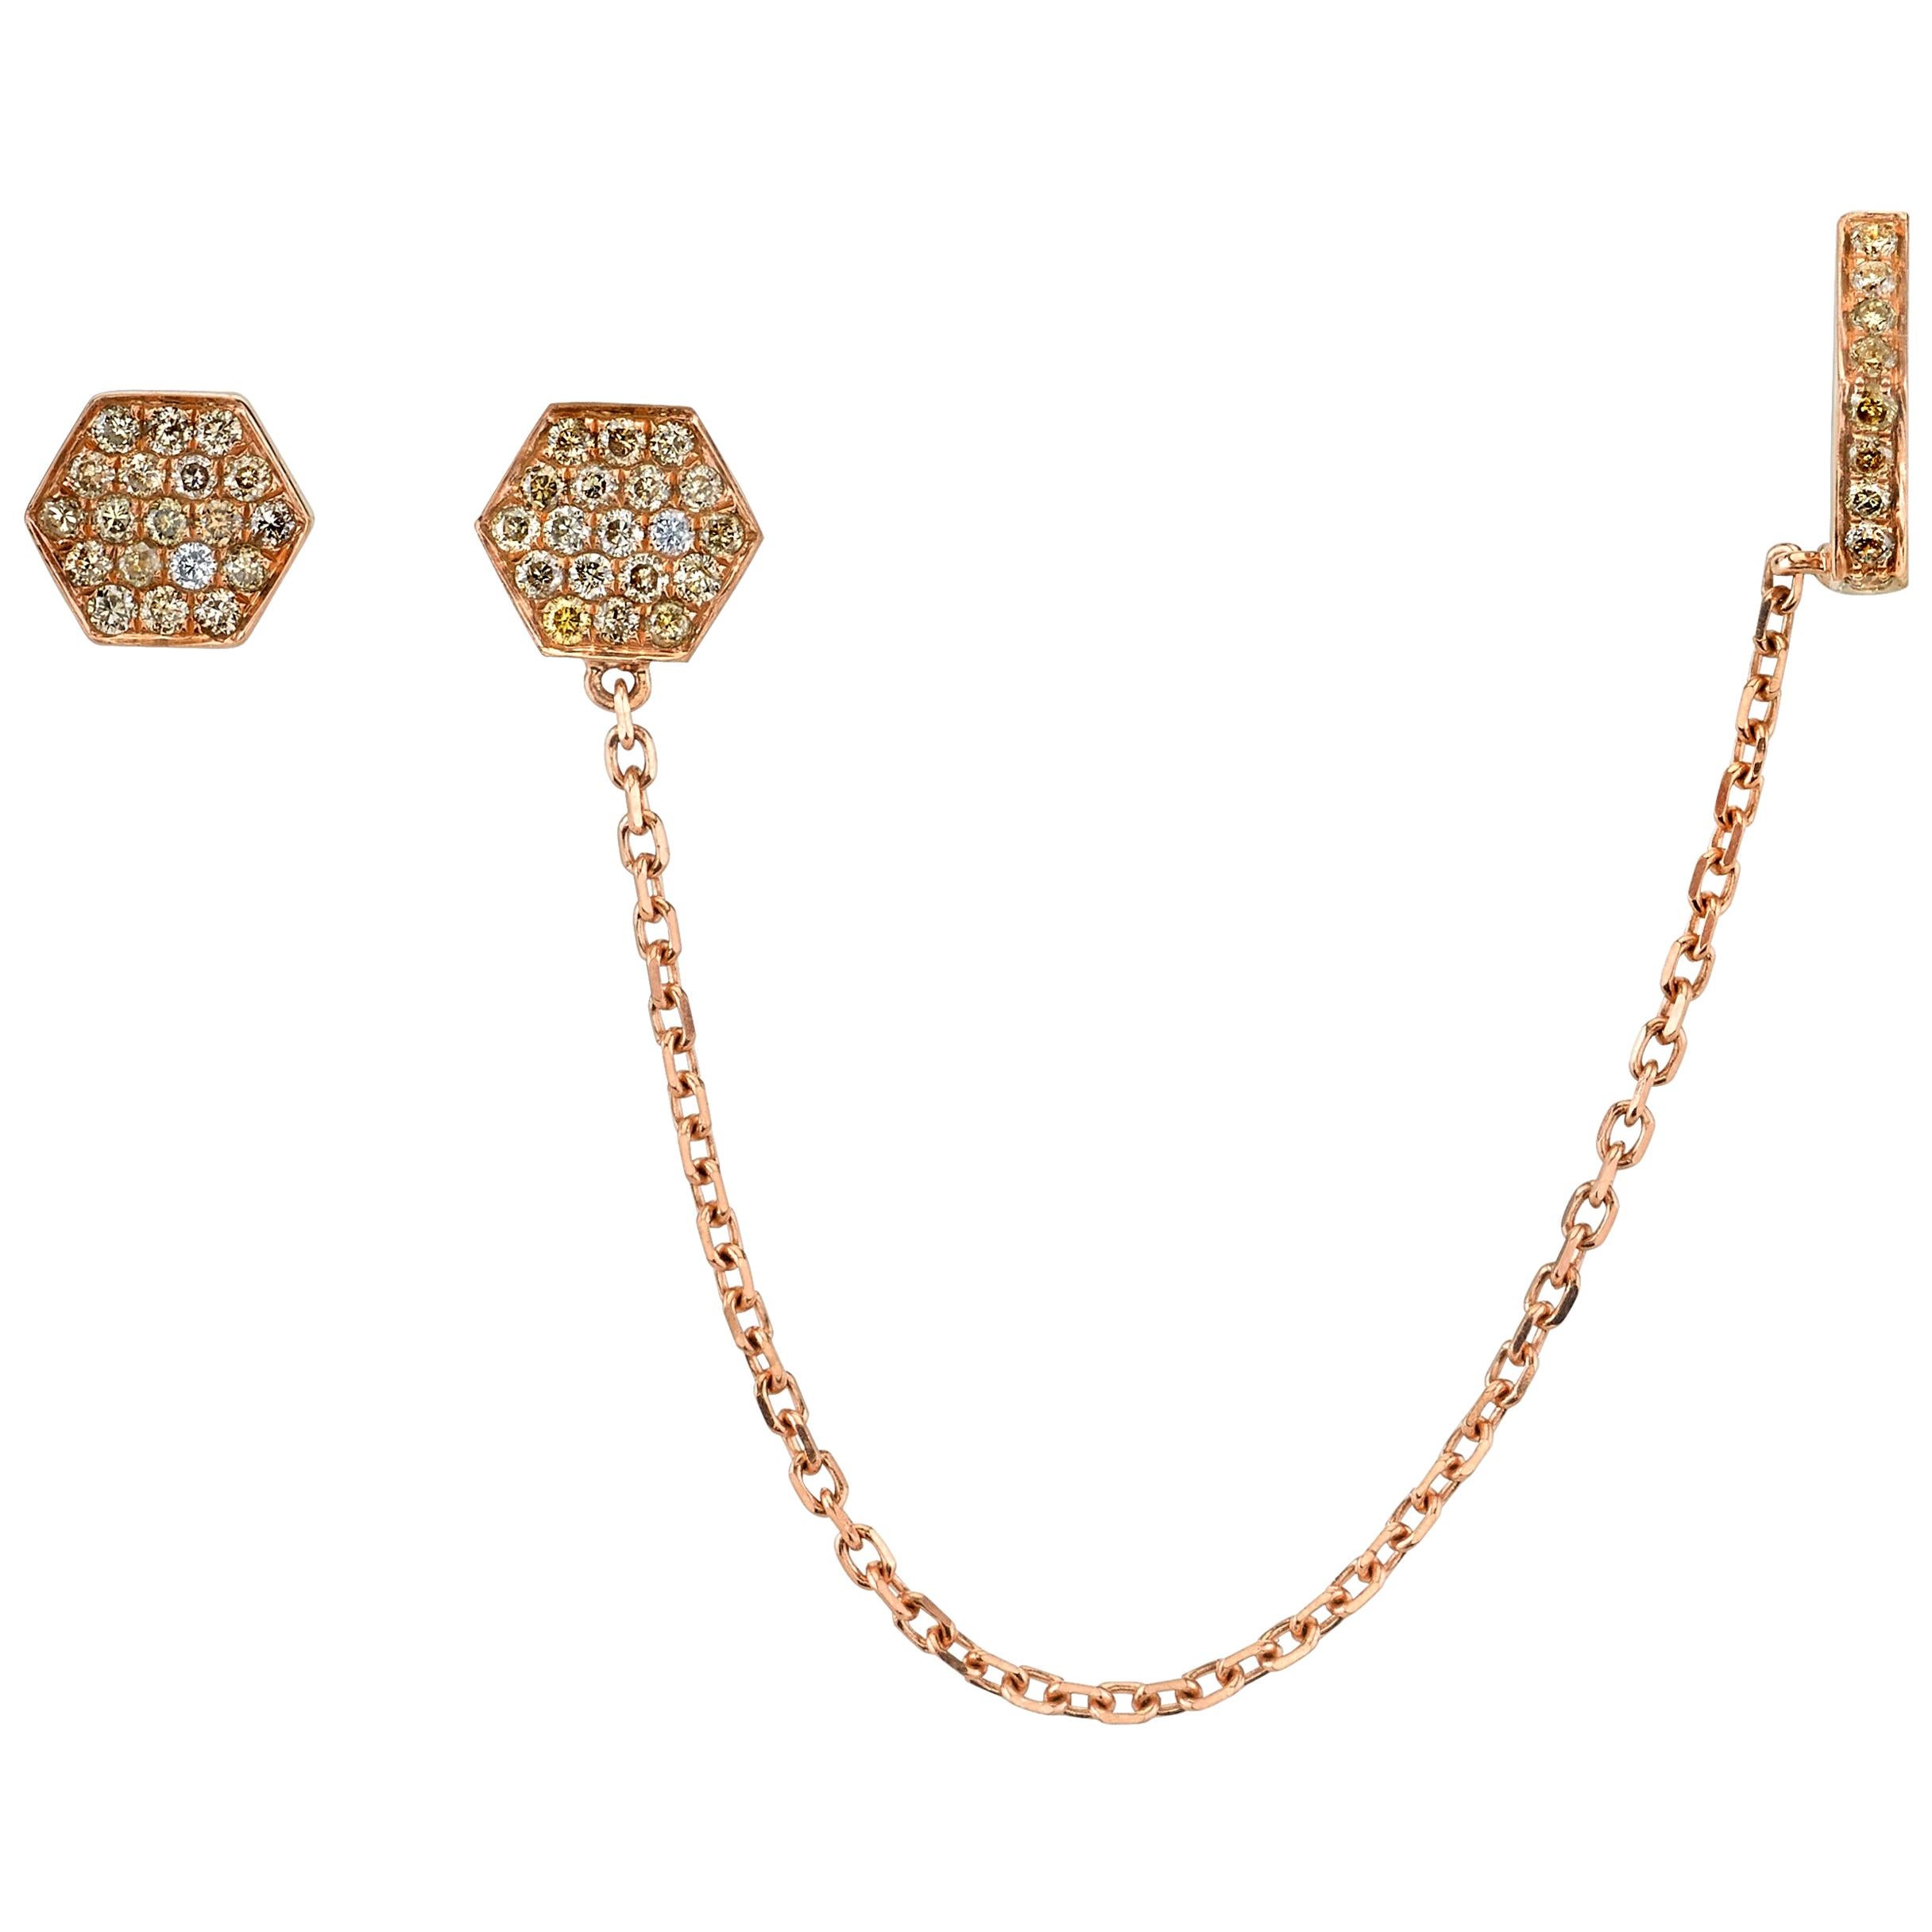 18K Rose Gold, Pave Brown Diamond Octagon Chain Earcuff with Matching Stud